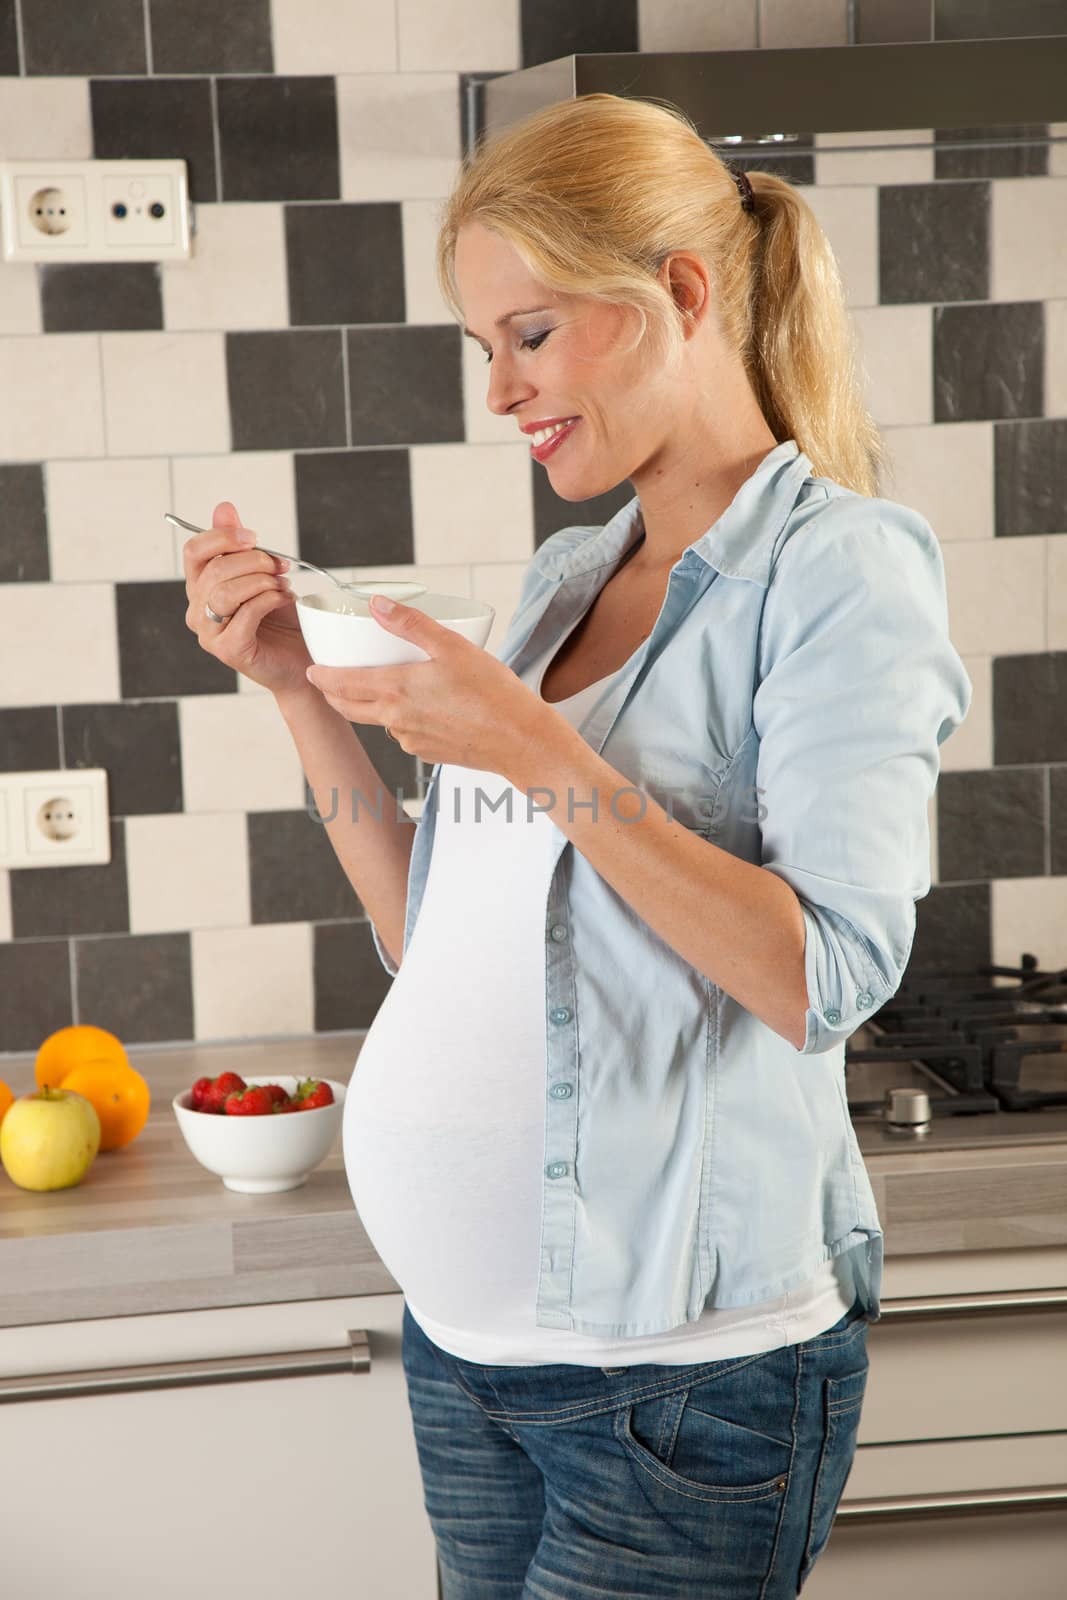 Attractive young woman having a healthy lunch while being pregnant